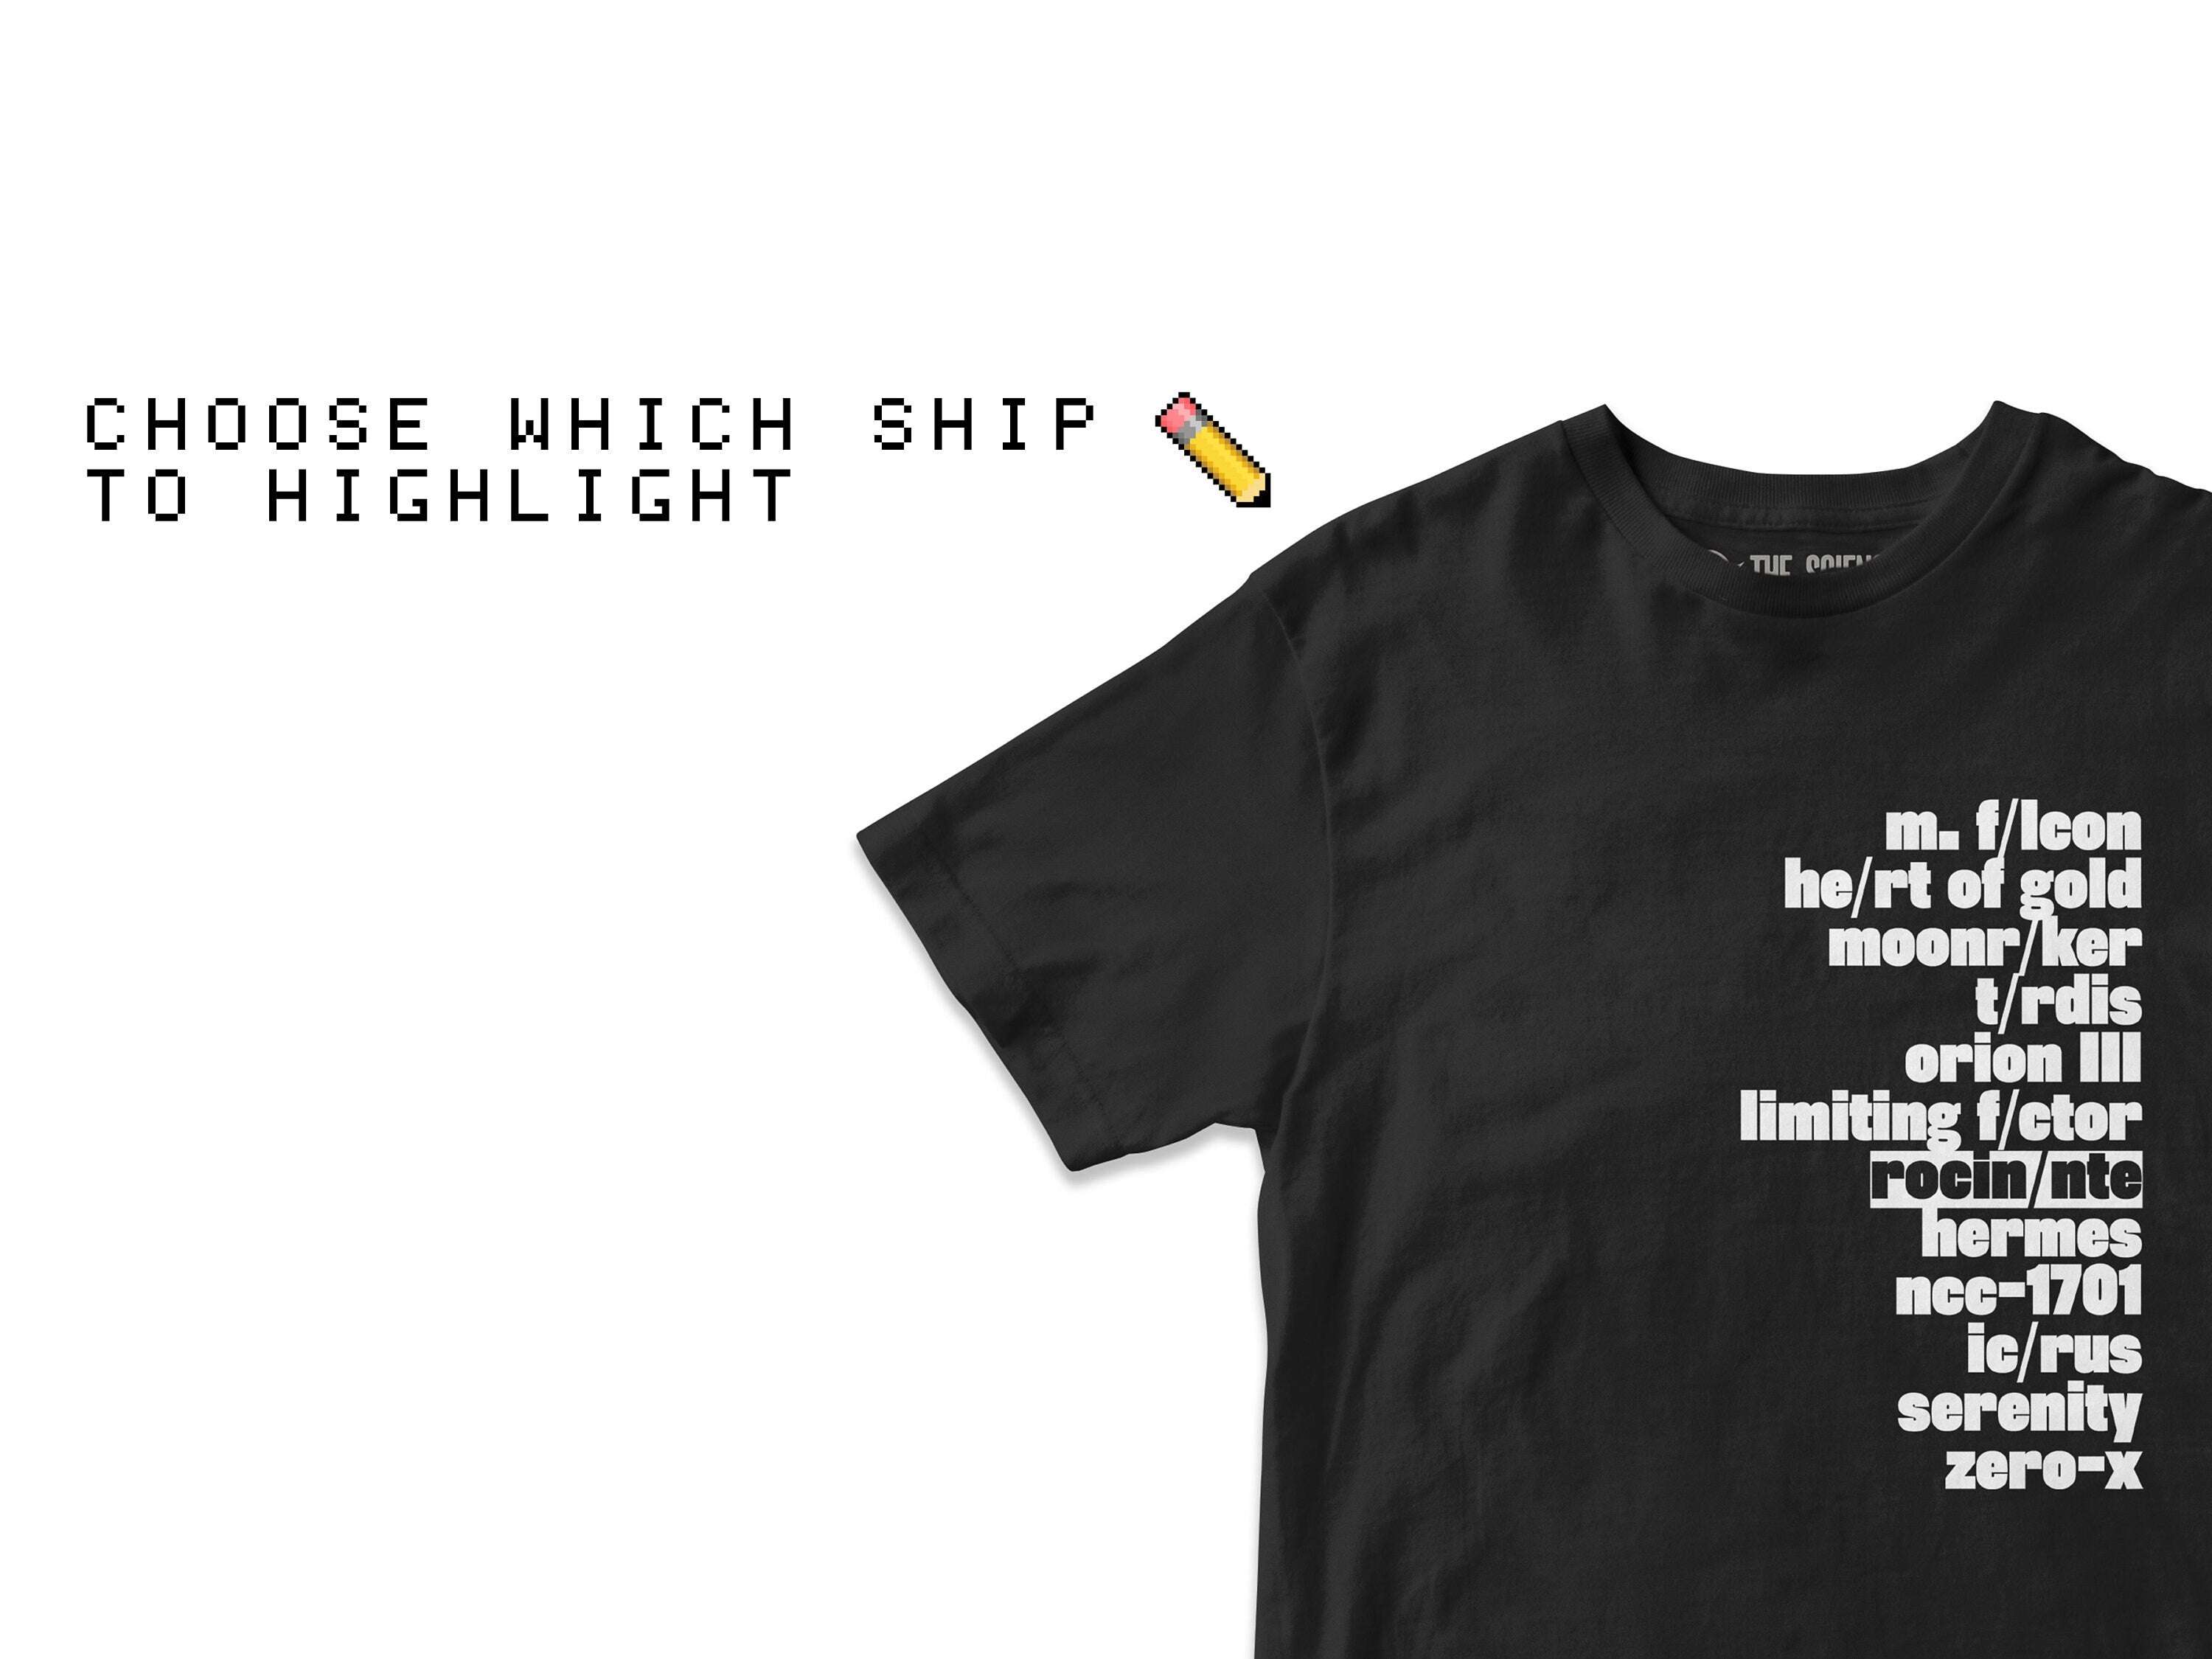 Personalized Sci-Fi Ships T-Shirt - Culture Series, HHGTTG, Expanse - Tees for Nerds